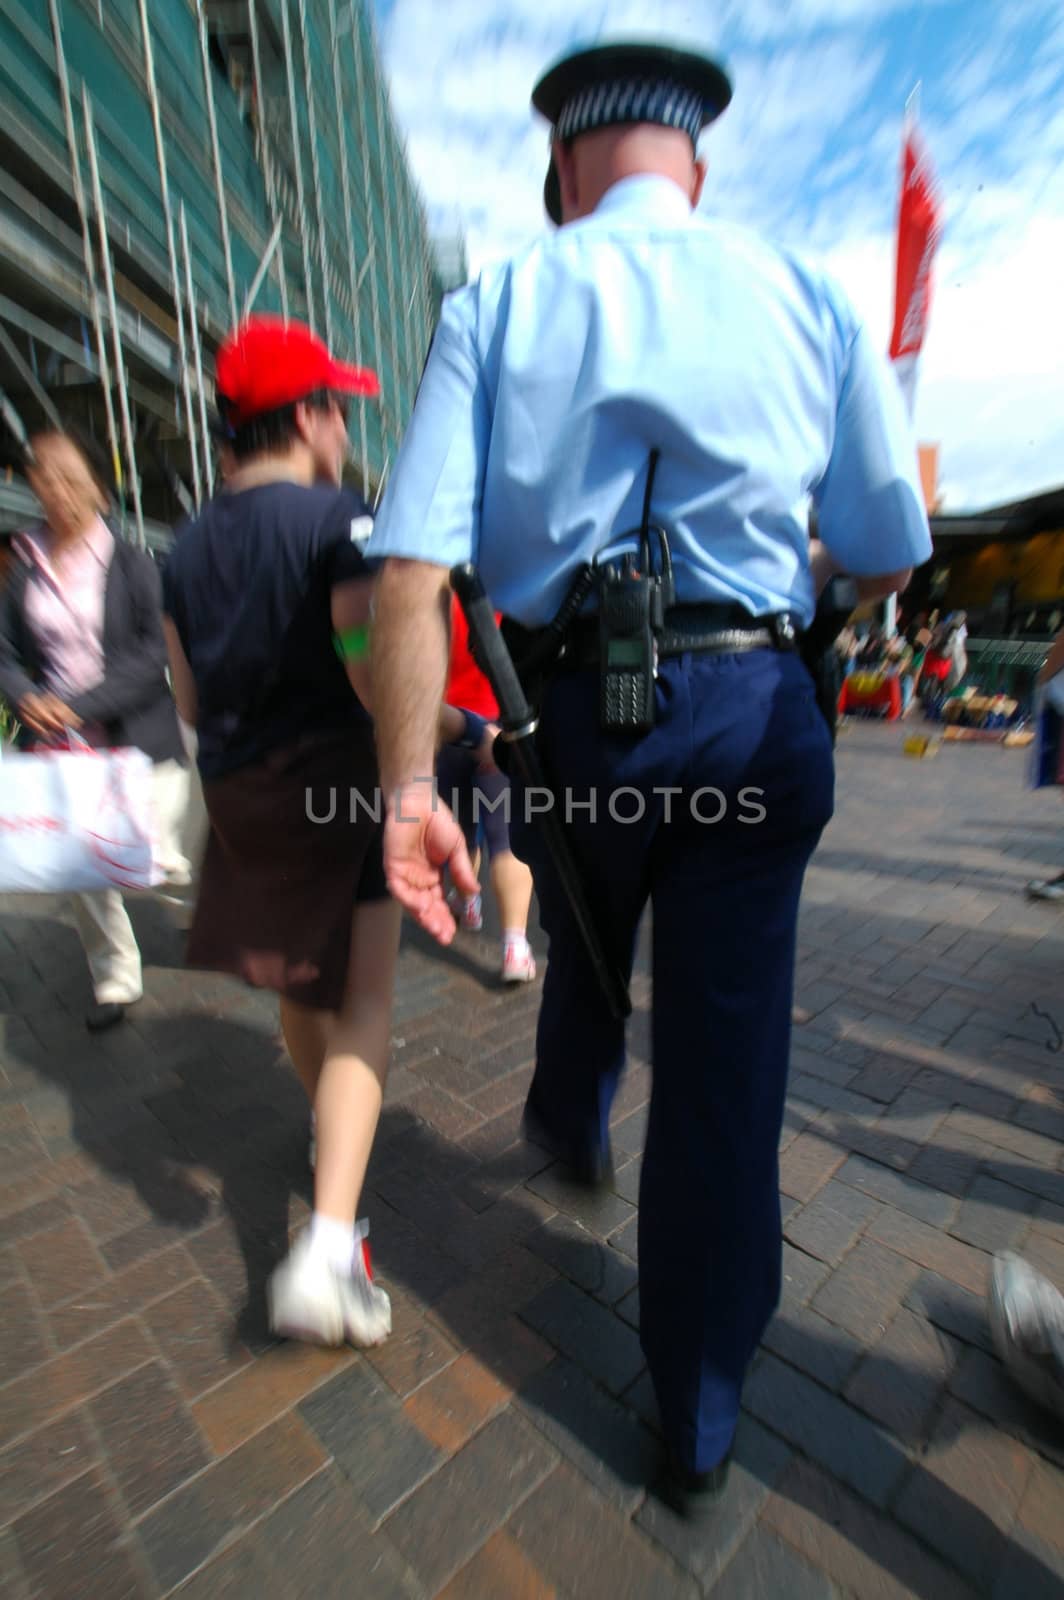 cop in blue uniform arresting or investigating a young man, picture is motion blurred